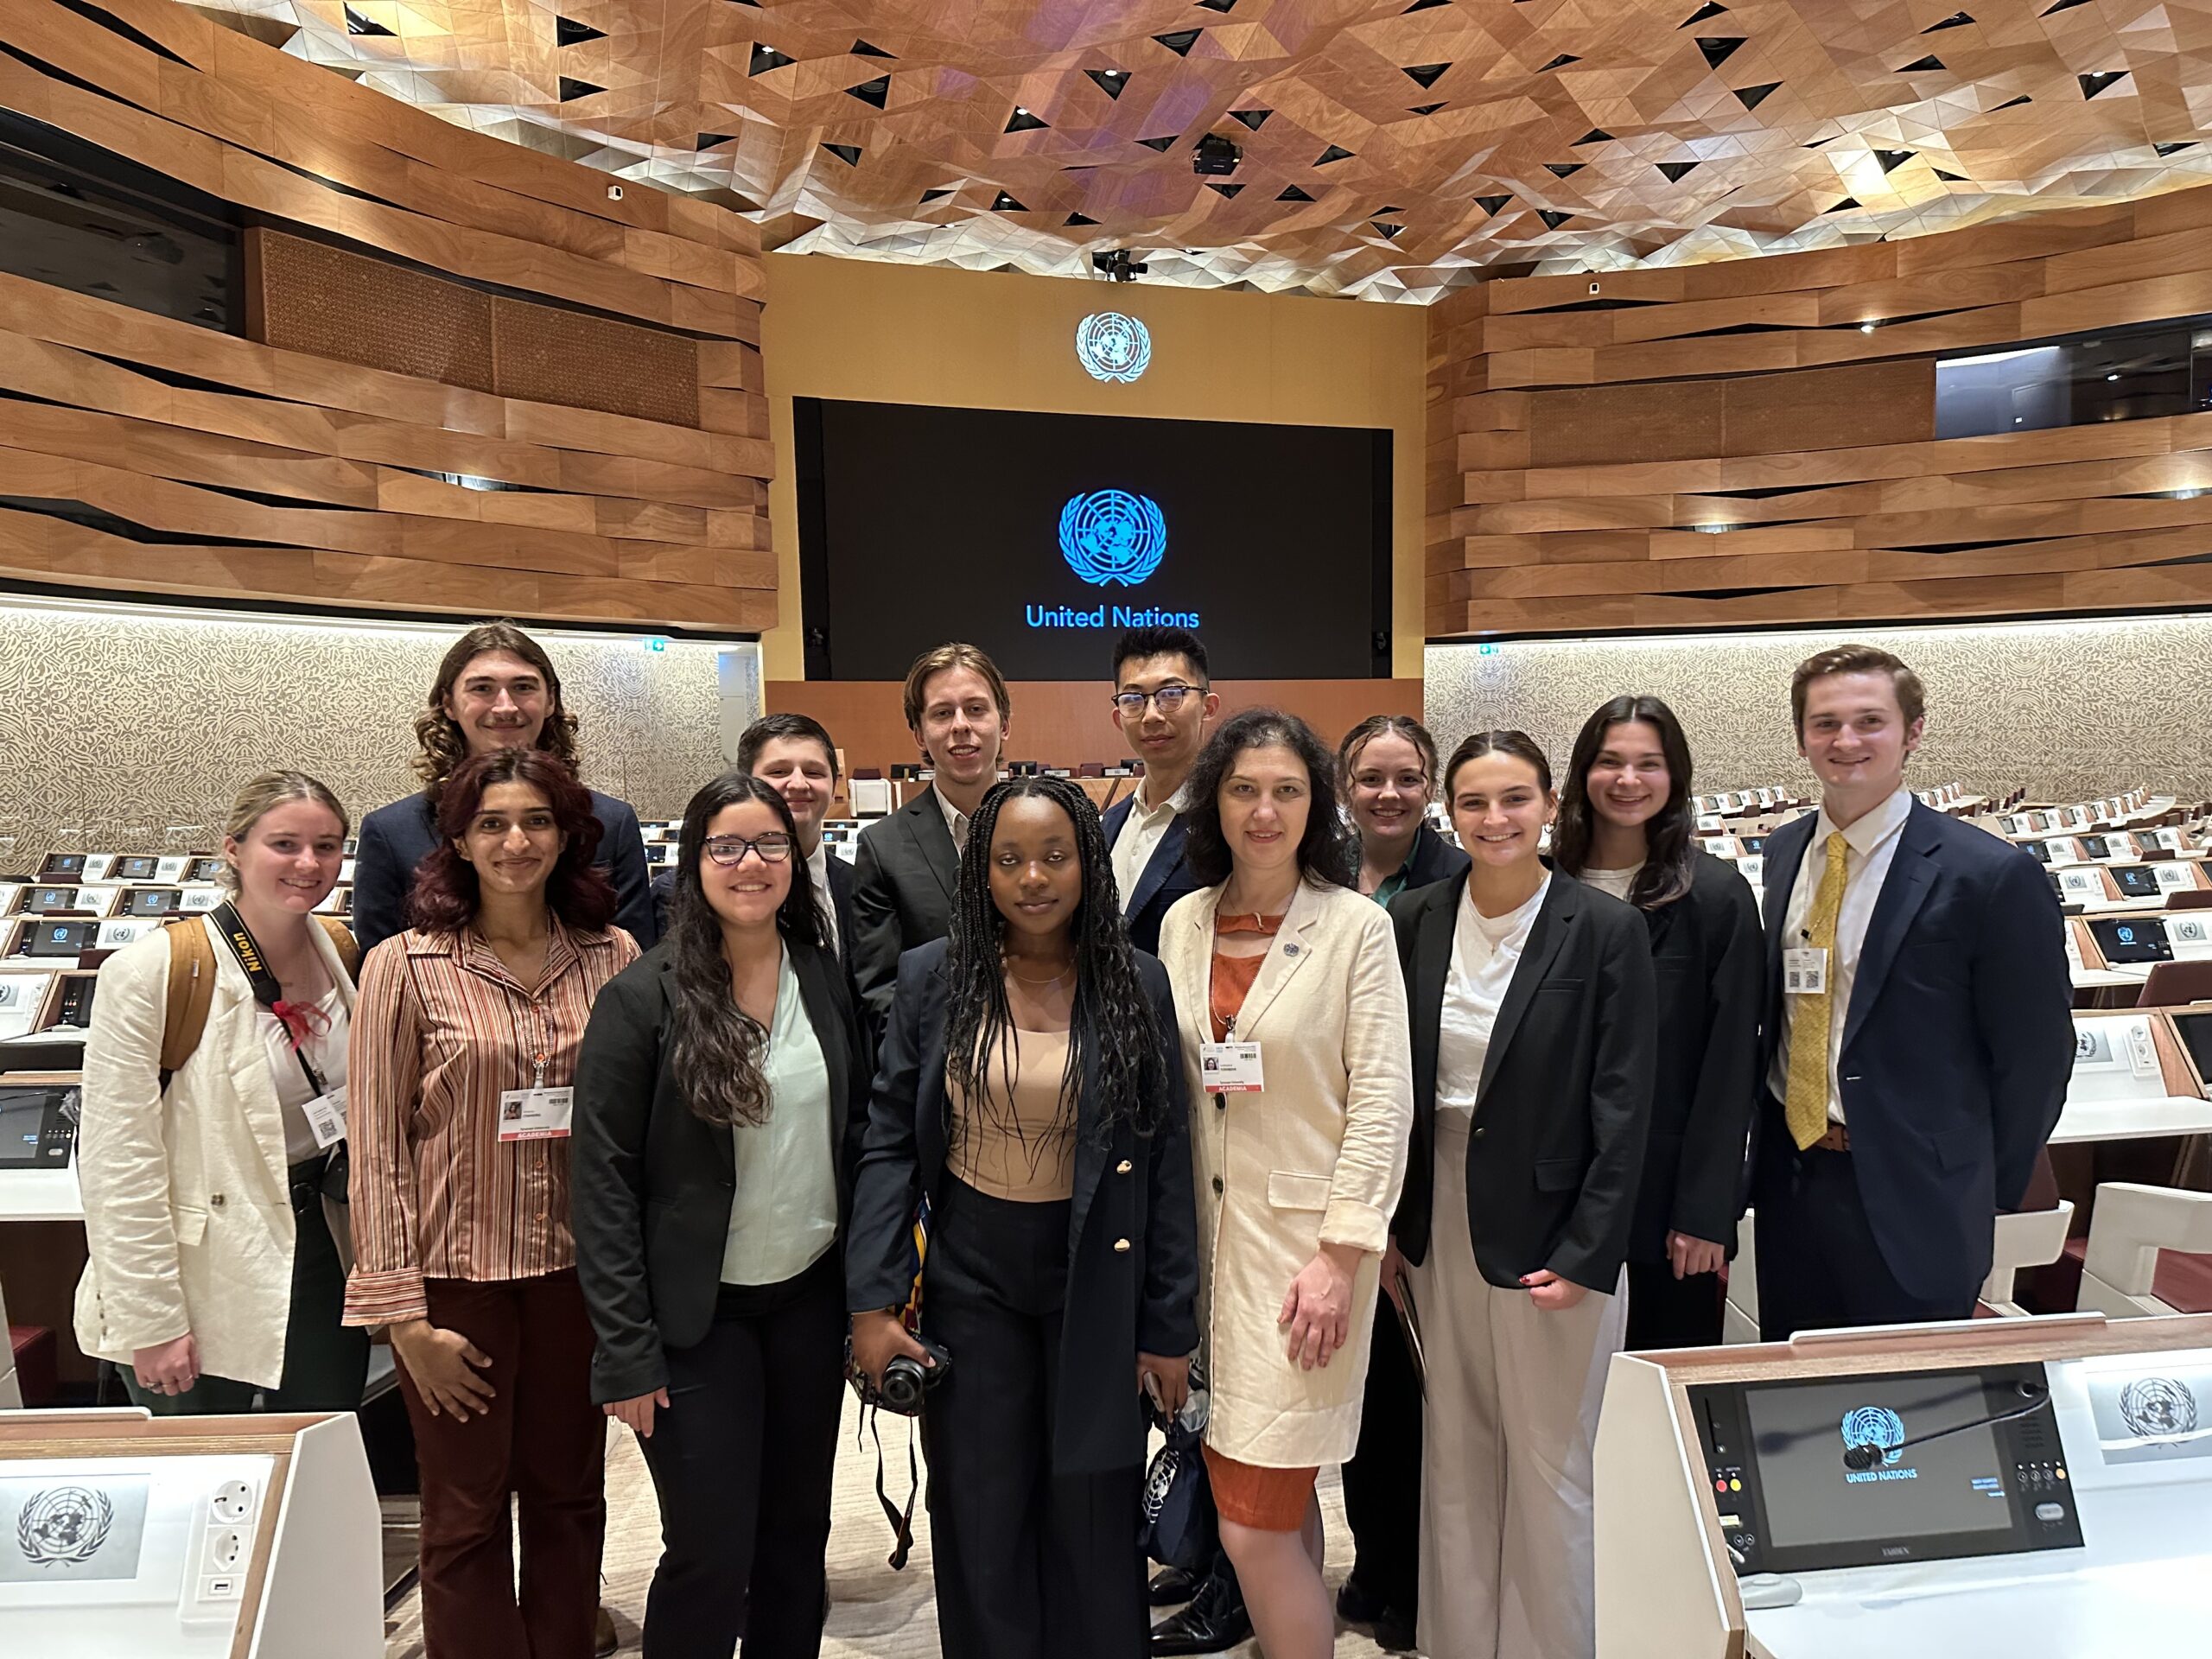 Syracuse University Students at the UNEP Conference in Geneva